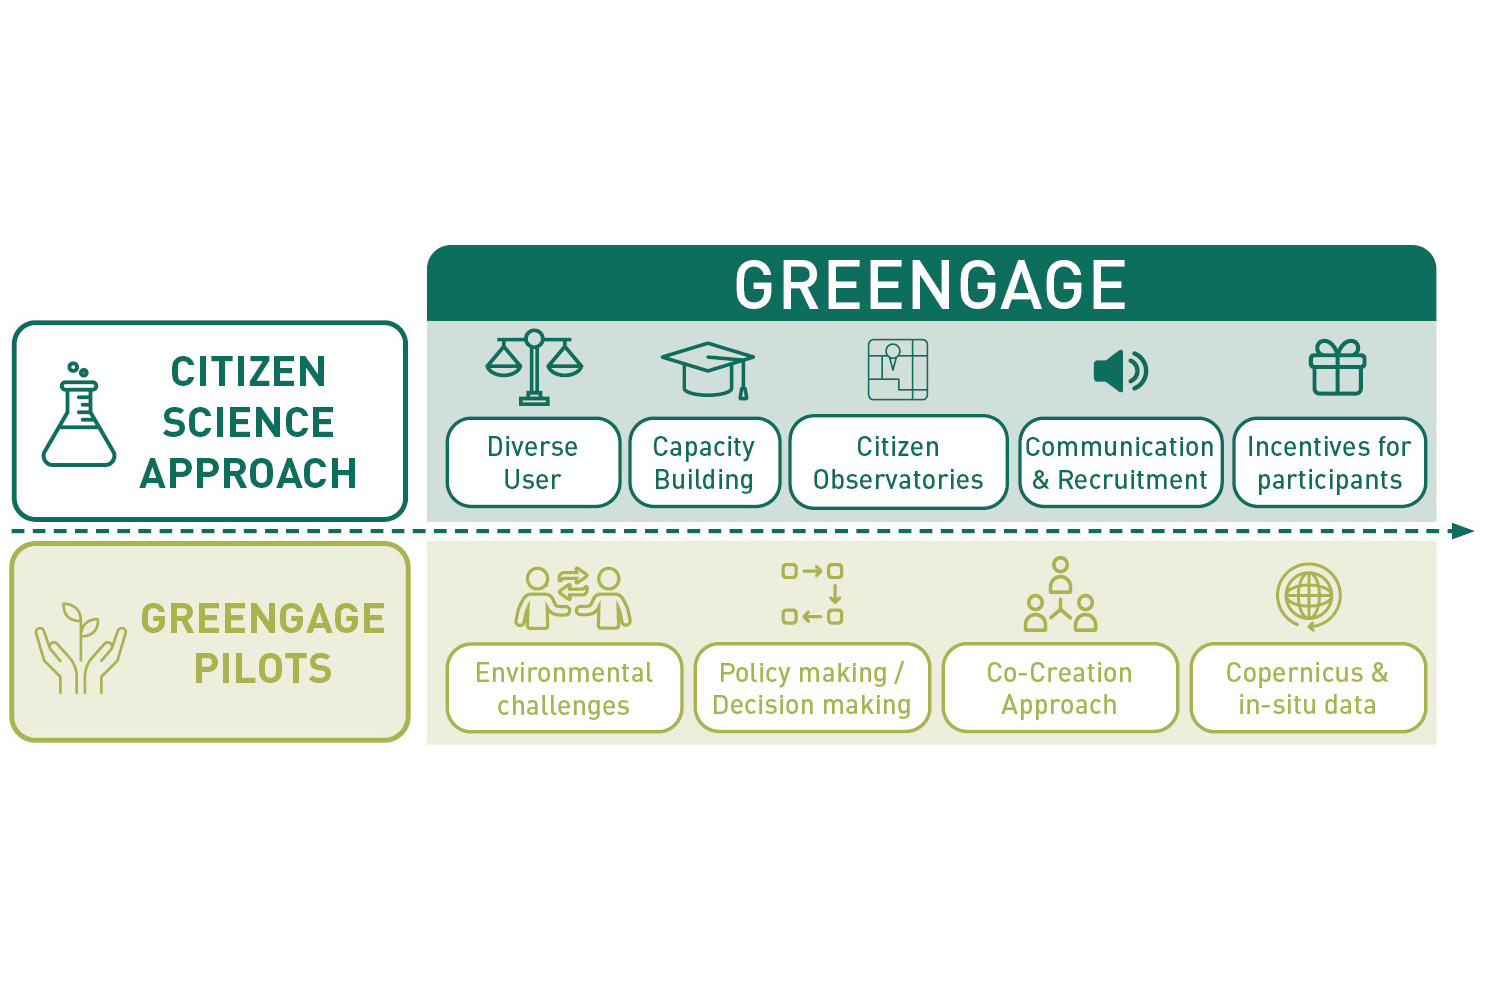 On display is a diagram explaining in English which work packages the GREENGAGE project is pursuing.